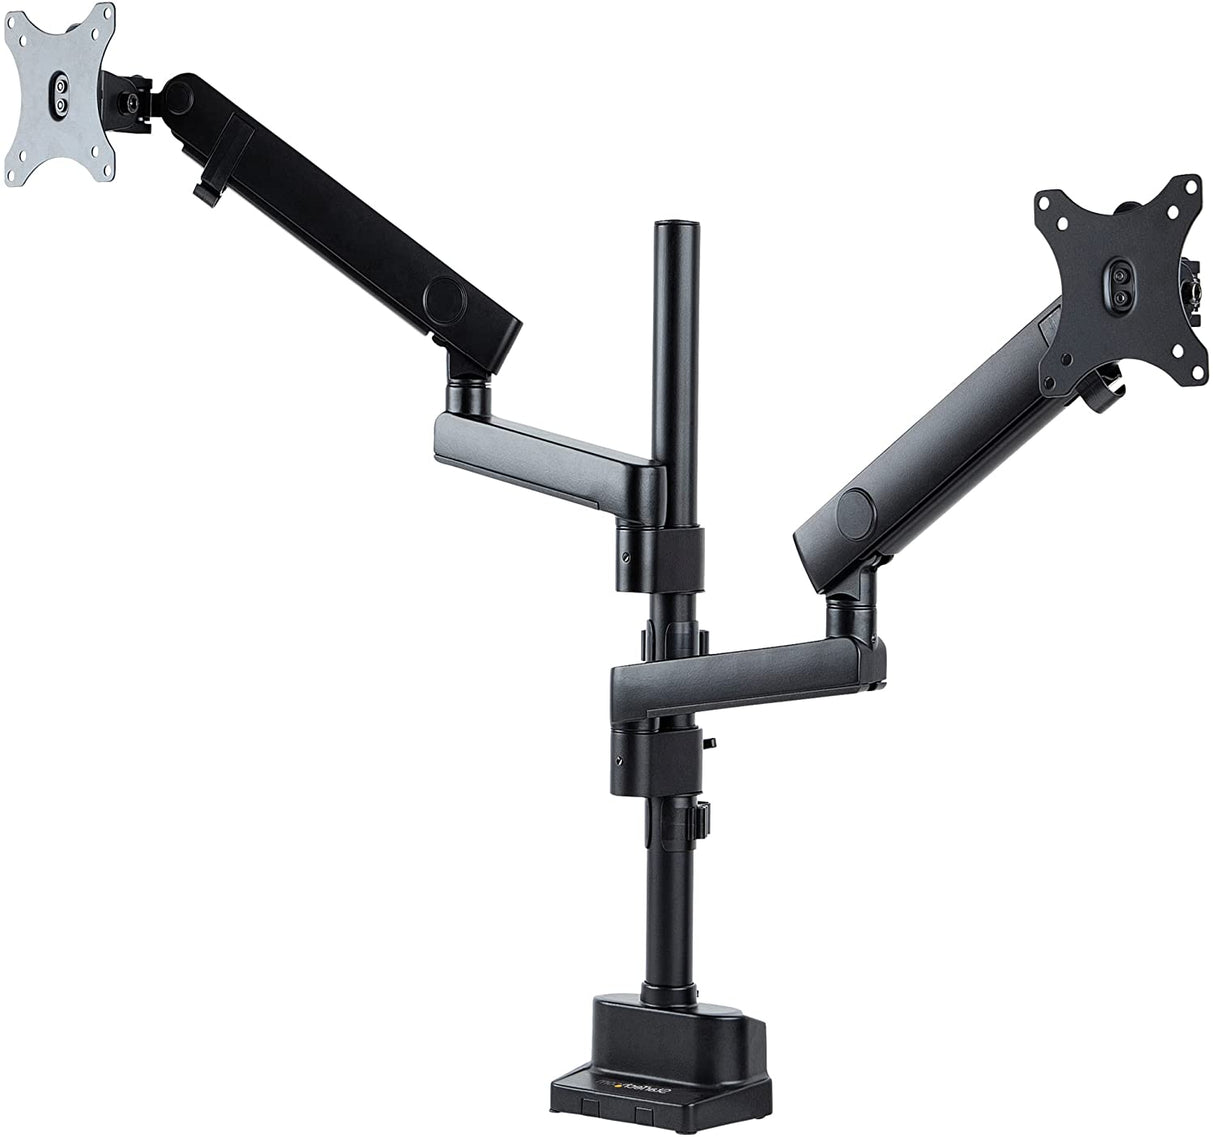 StarTech.com Desk Mount Dual Monitor Arm - Full Motion Monitor Mount for 2x VESA Displays up to 32" (17lb/8kg) - Vertical Stackable Arms - Height Adjustable/Articulating - Clamp/Grommet (ARMDUALPIVOT)